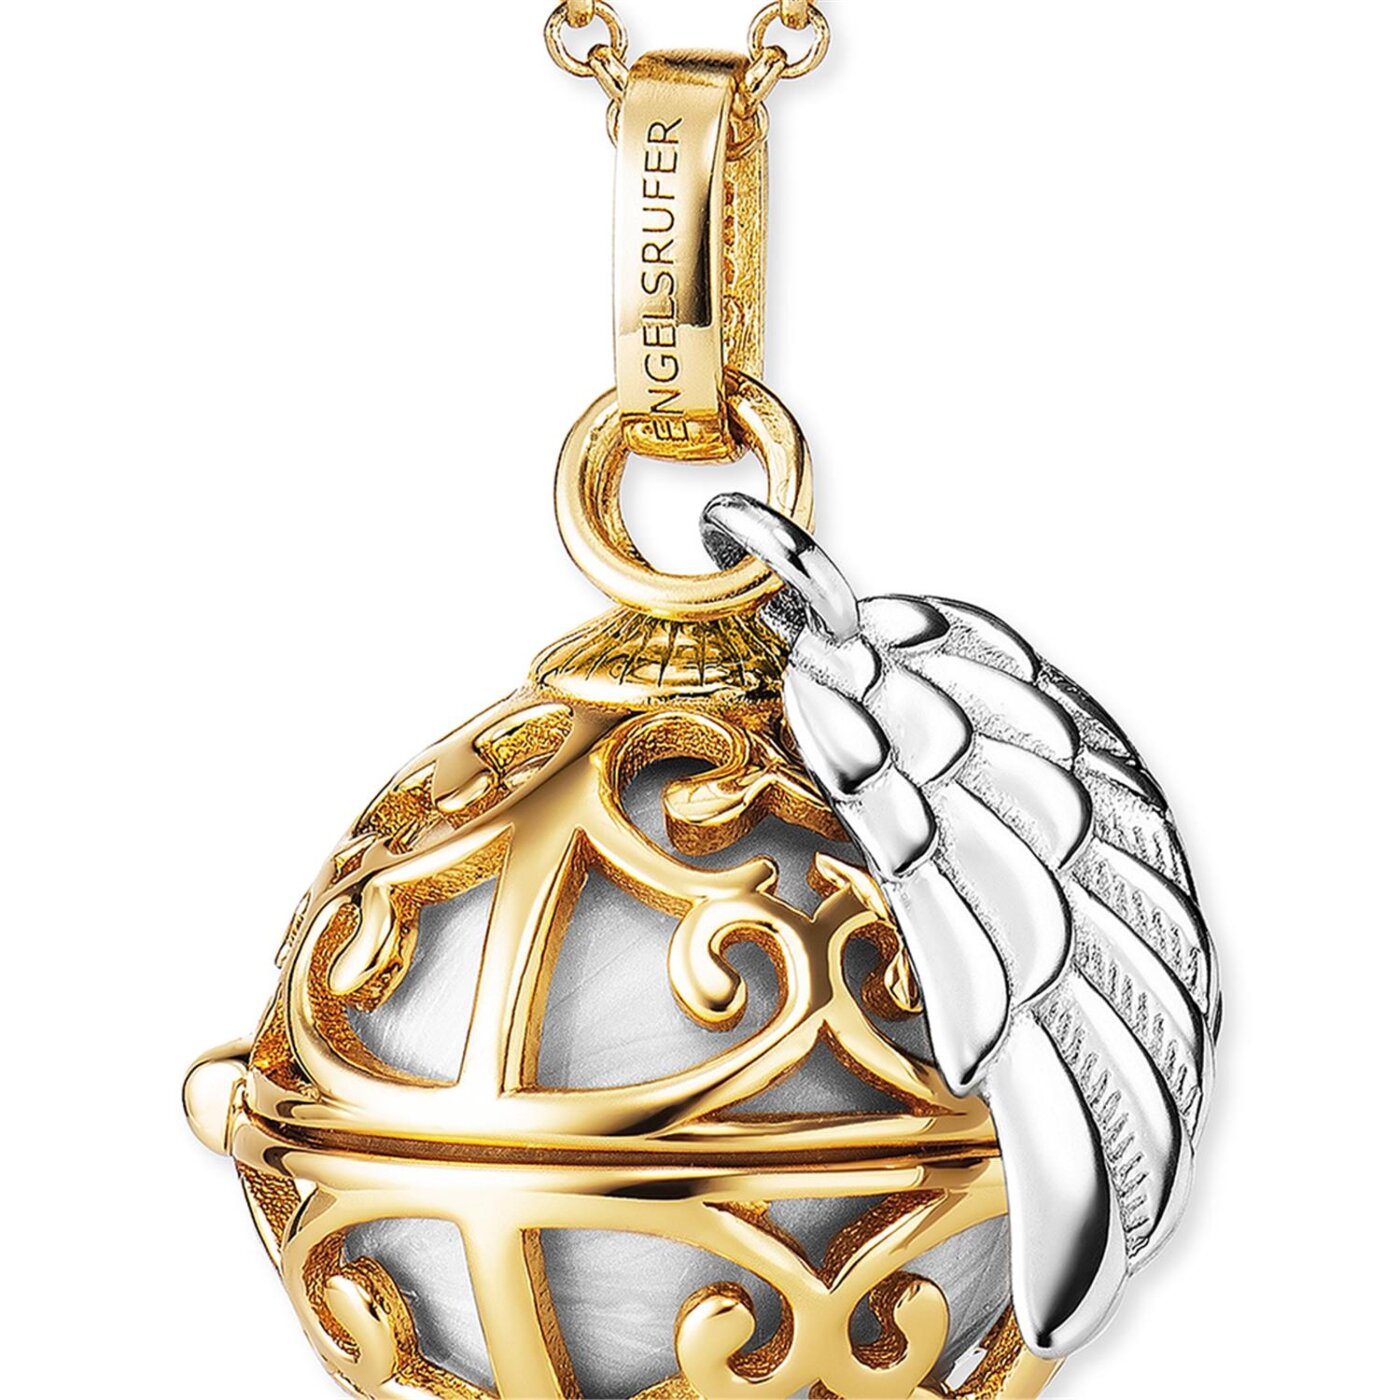 Engelsrufer sound ball necklace 925 silver gold-plated